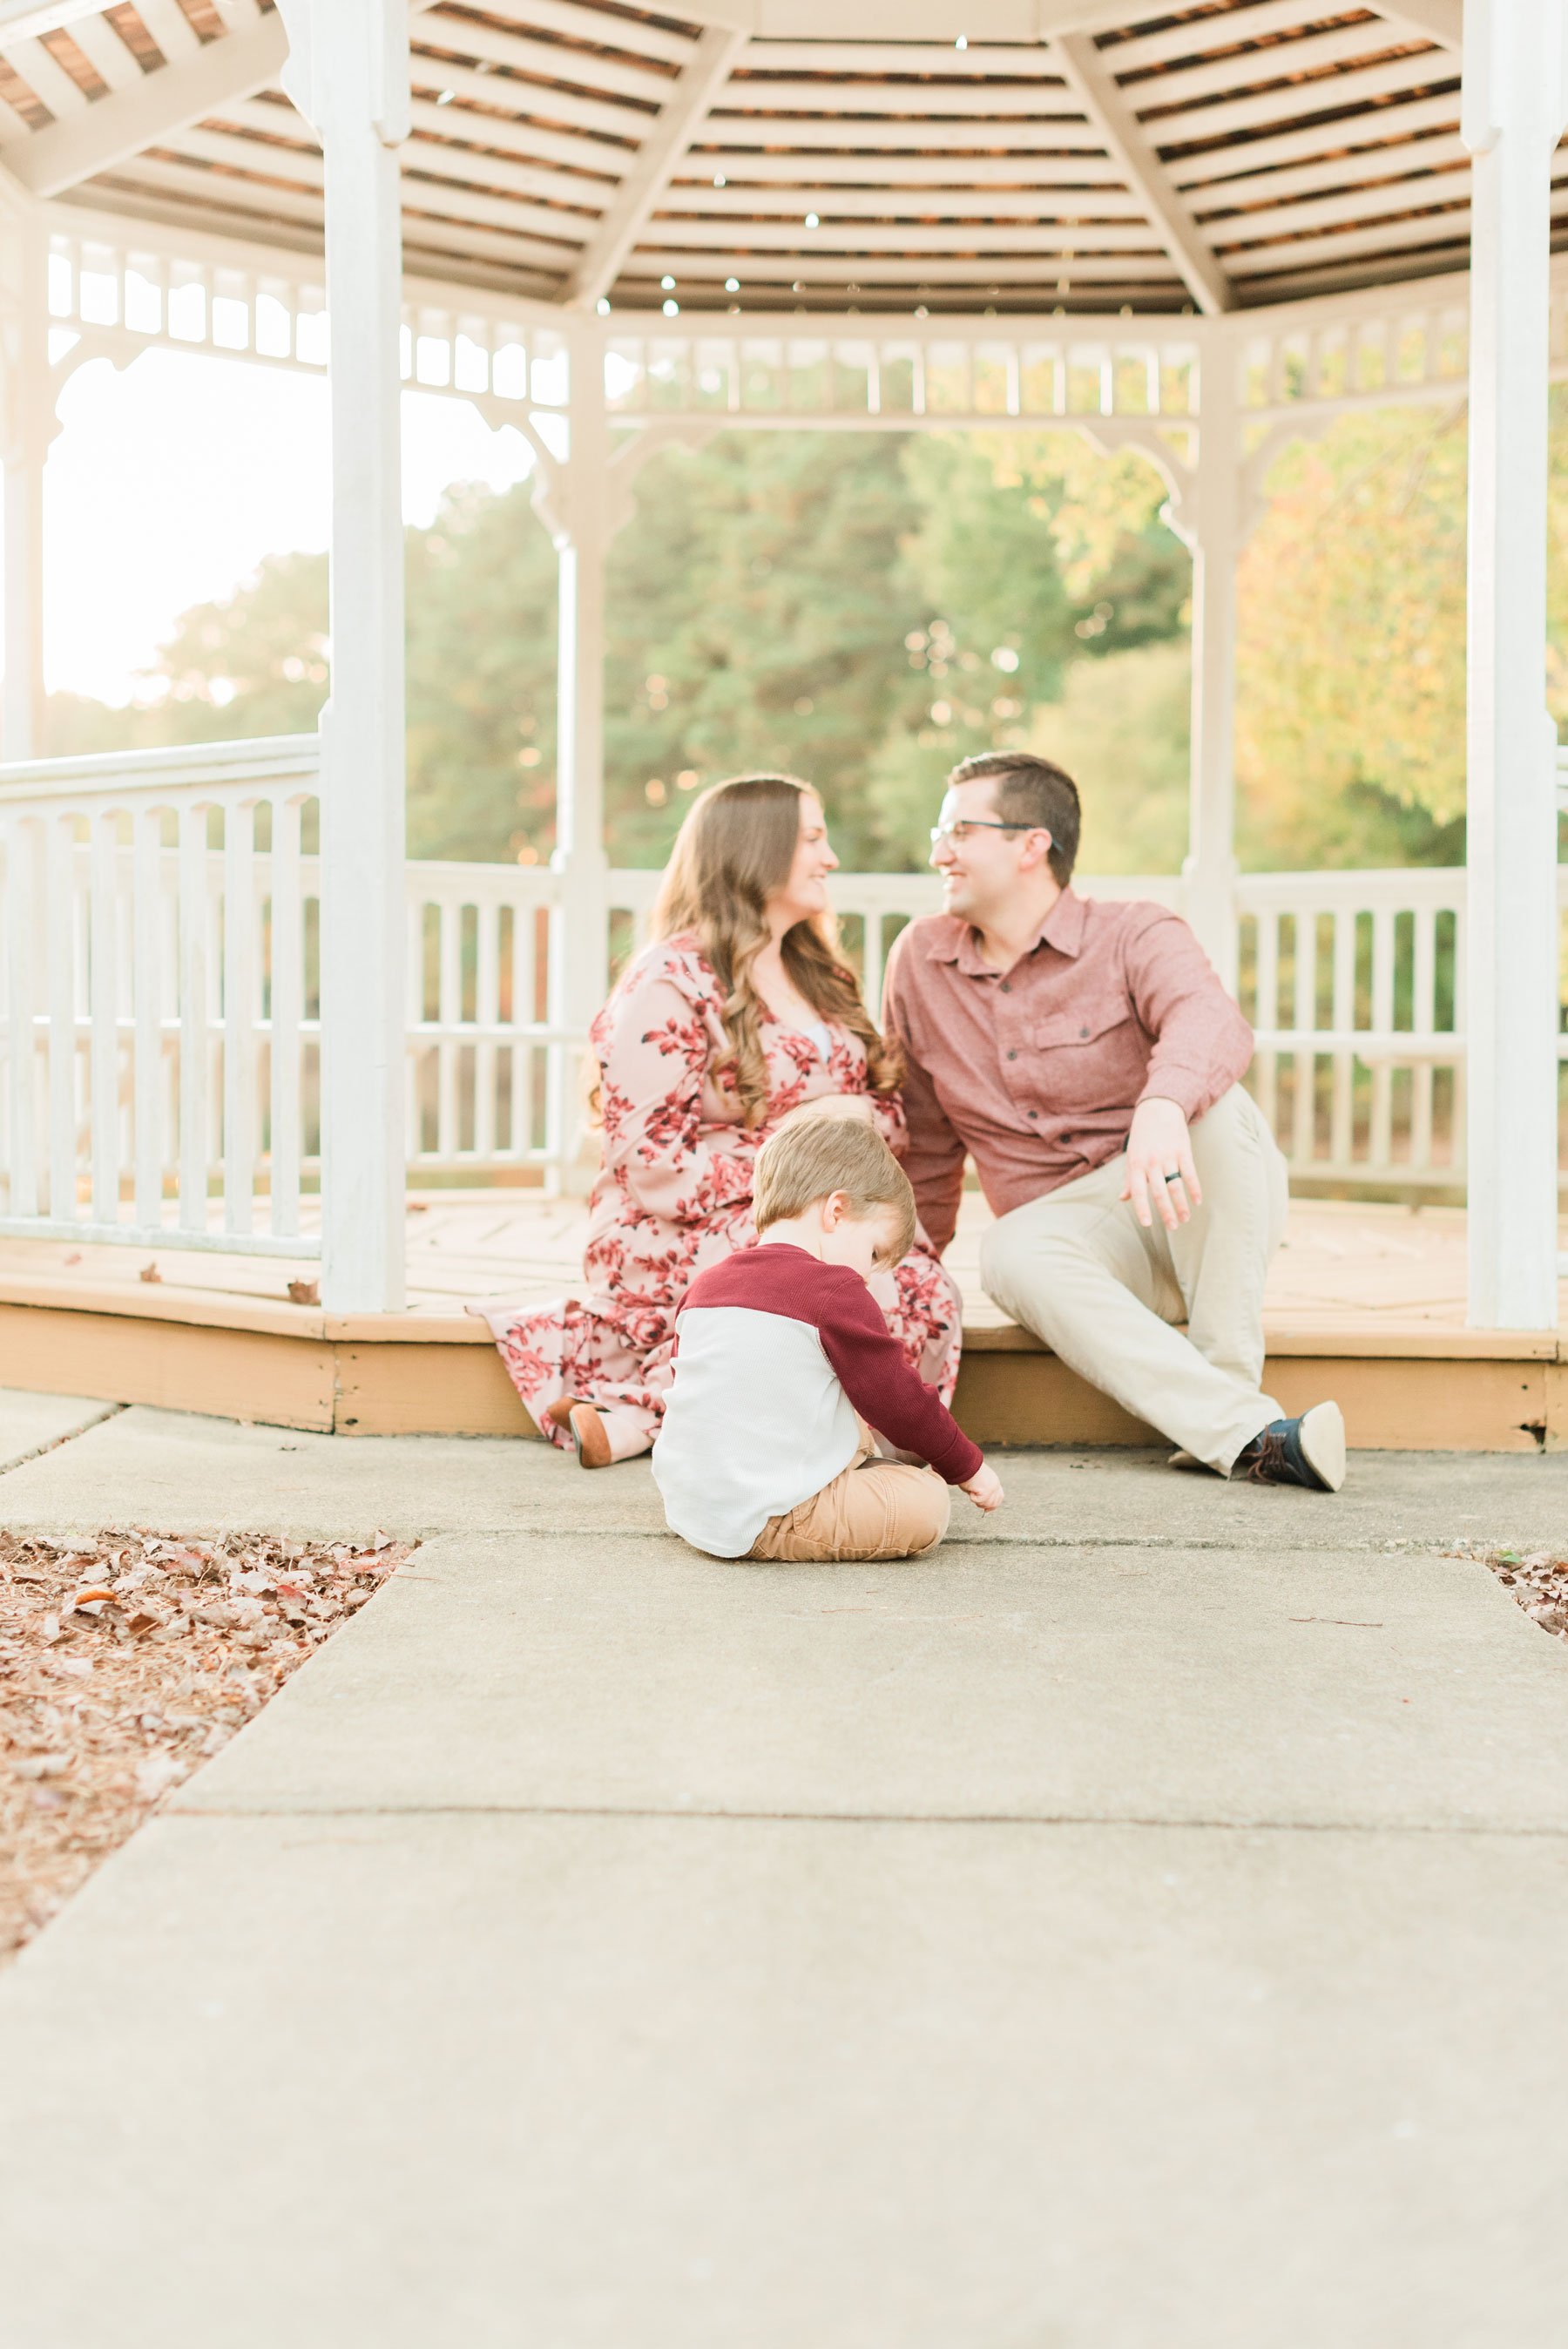  A pregnant woman looks into the eyes of her husband while their two-year-old son plays on the sidewalk in front of them. Atlanta Georgia Sandy Springs Sharpsburg Roswell&nbsp; #familymaterintyphotos #pregnacyphotoshoot #fathersonphoto #peachtreecity